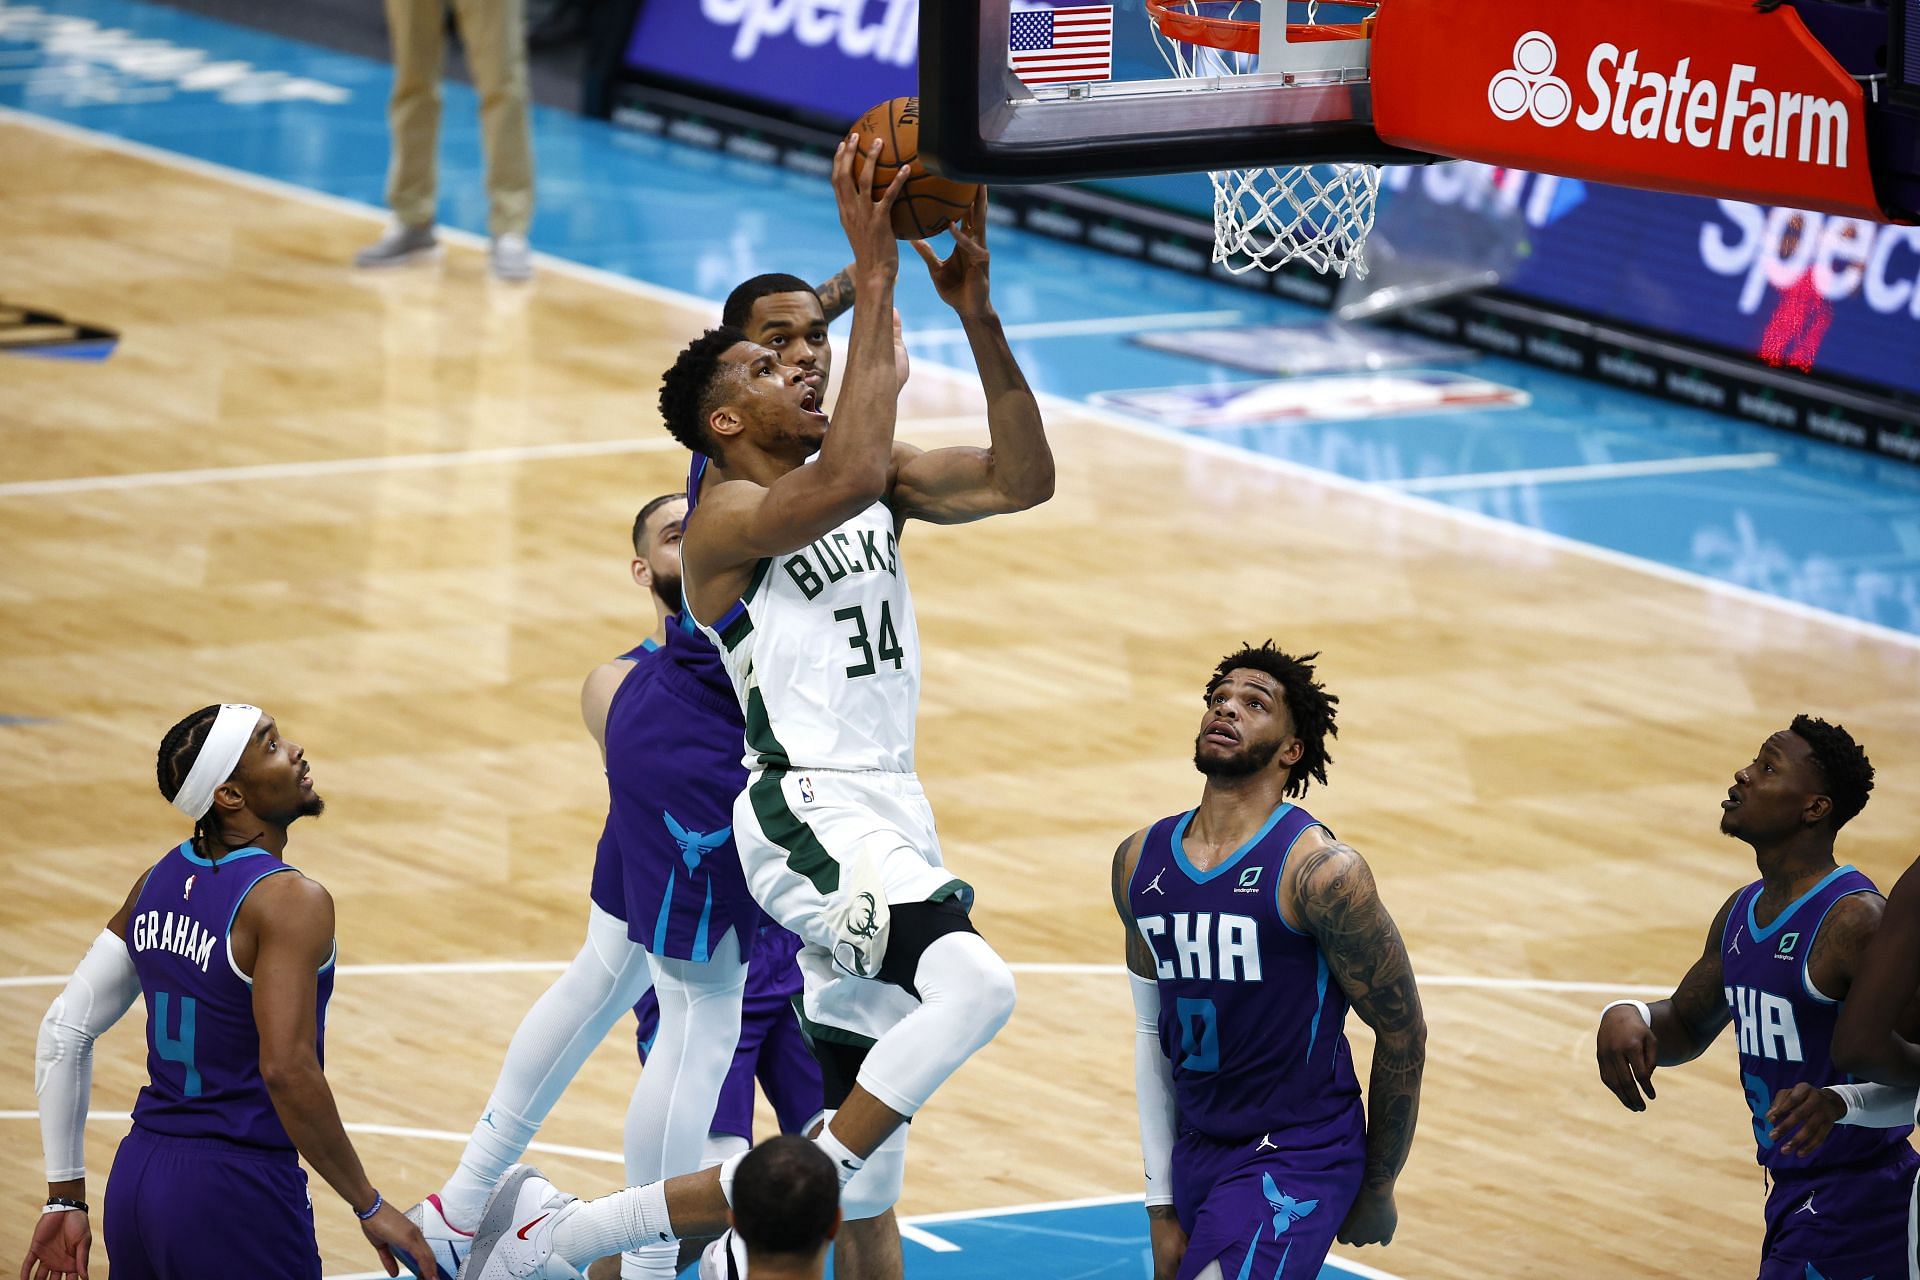 Giannis Antetokounmpo of the Milwaukee Bucks lays it in against the Charlotte Hornets